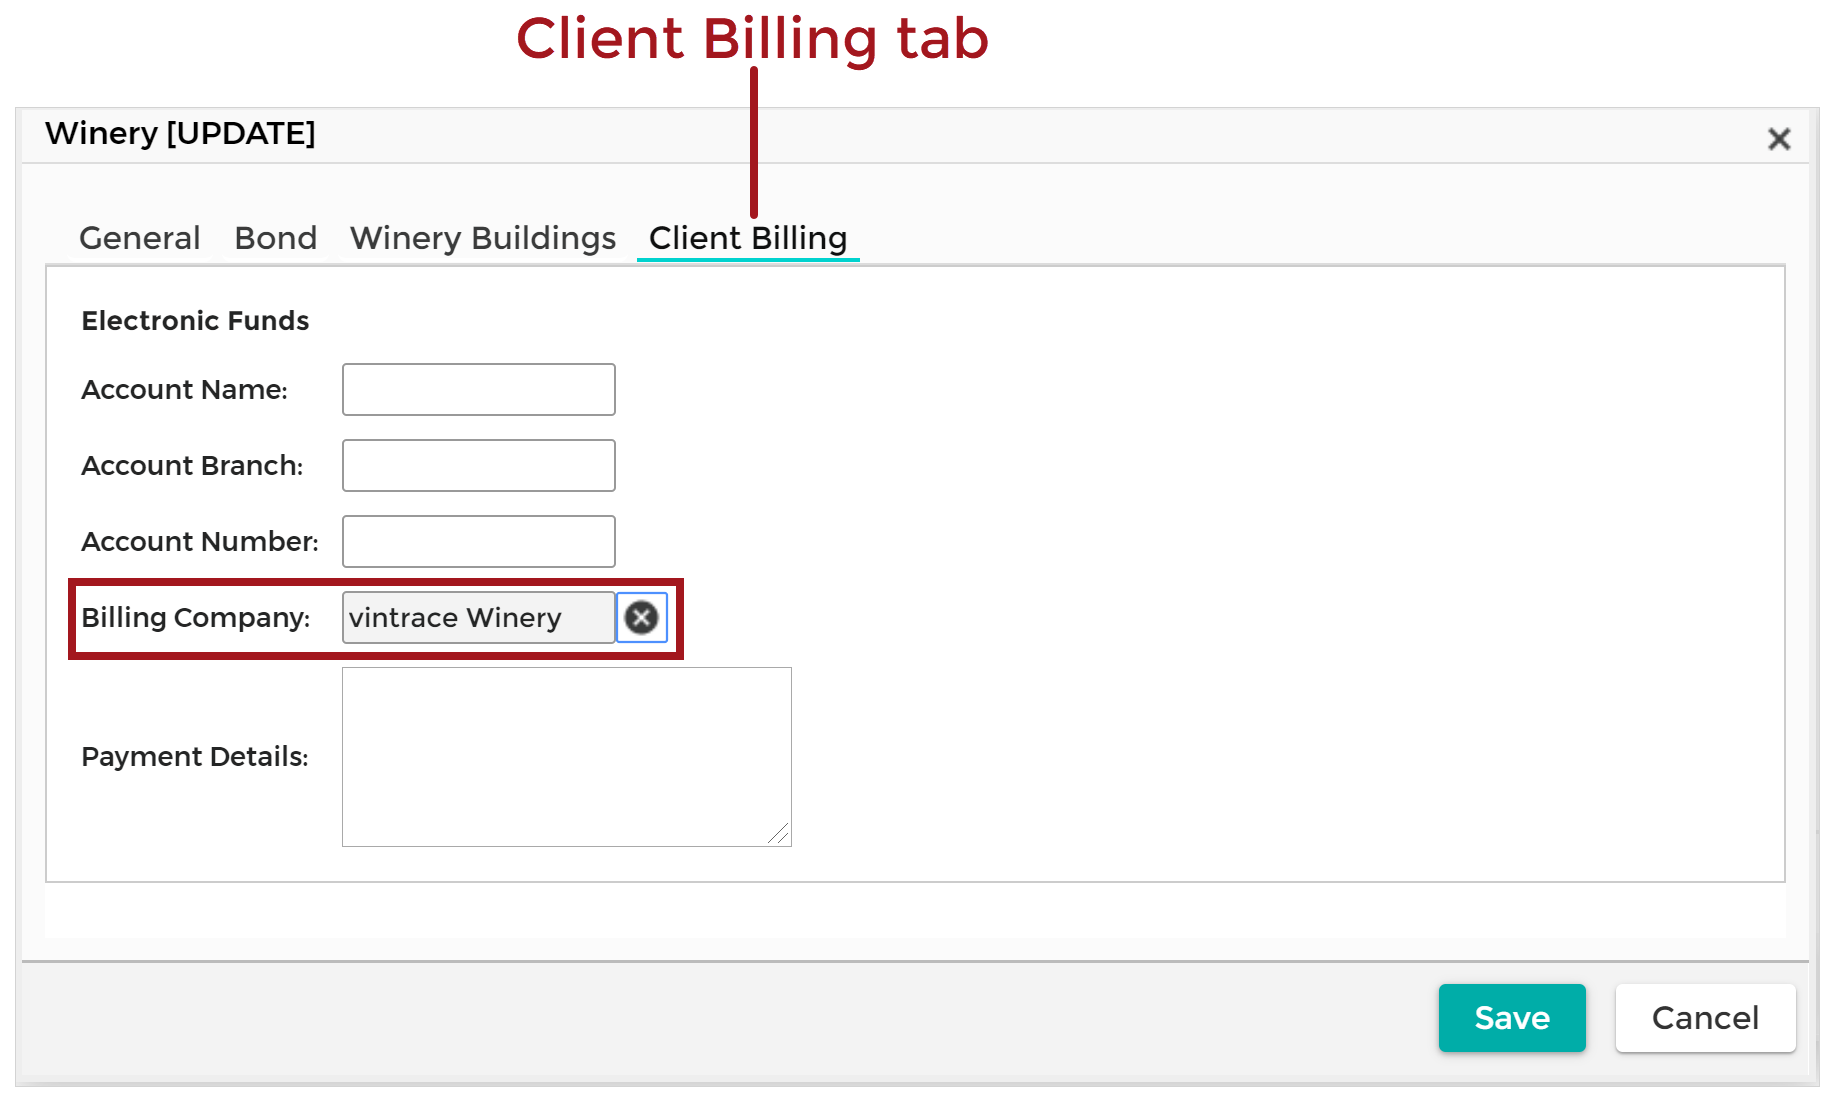 Winery_Update_-_Client_Billing_-_Billing_Company_20201111.png